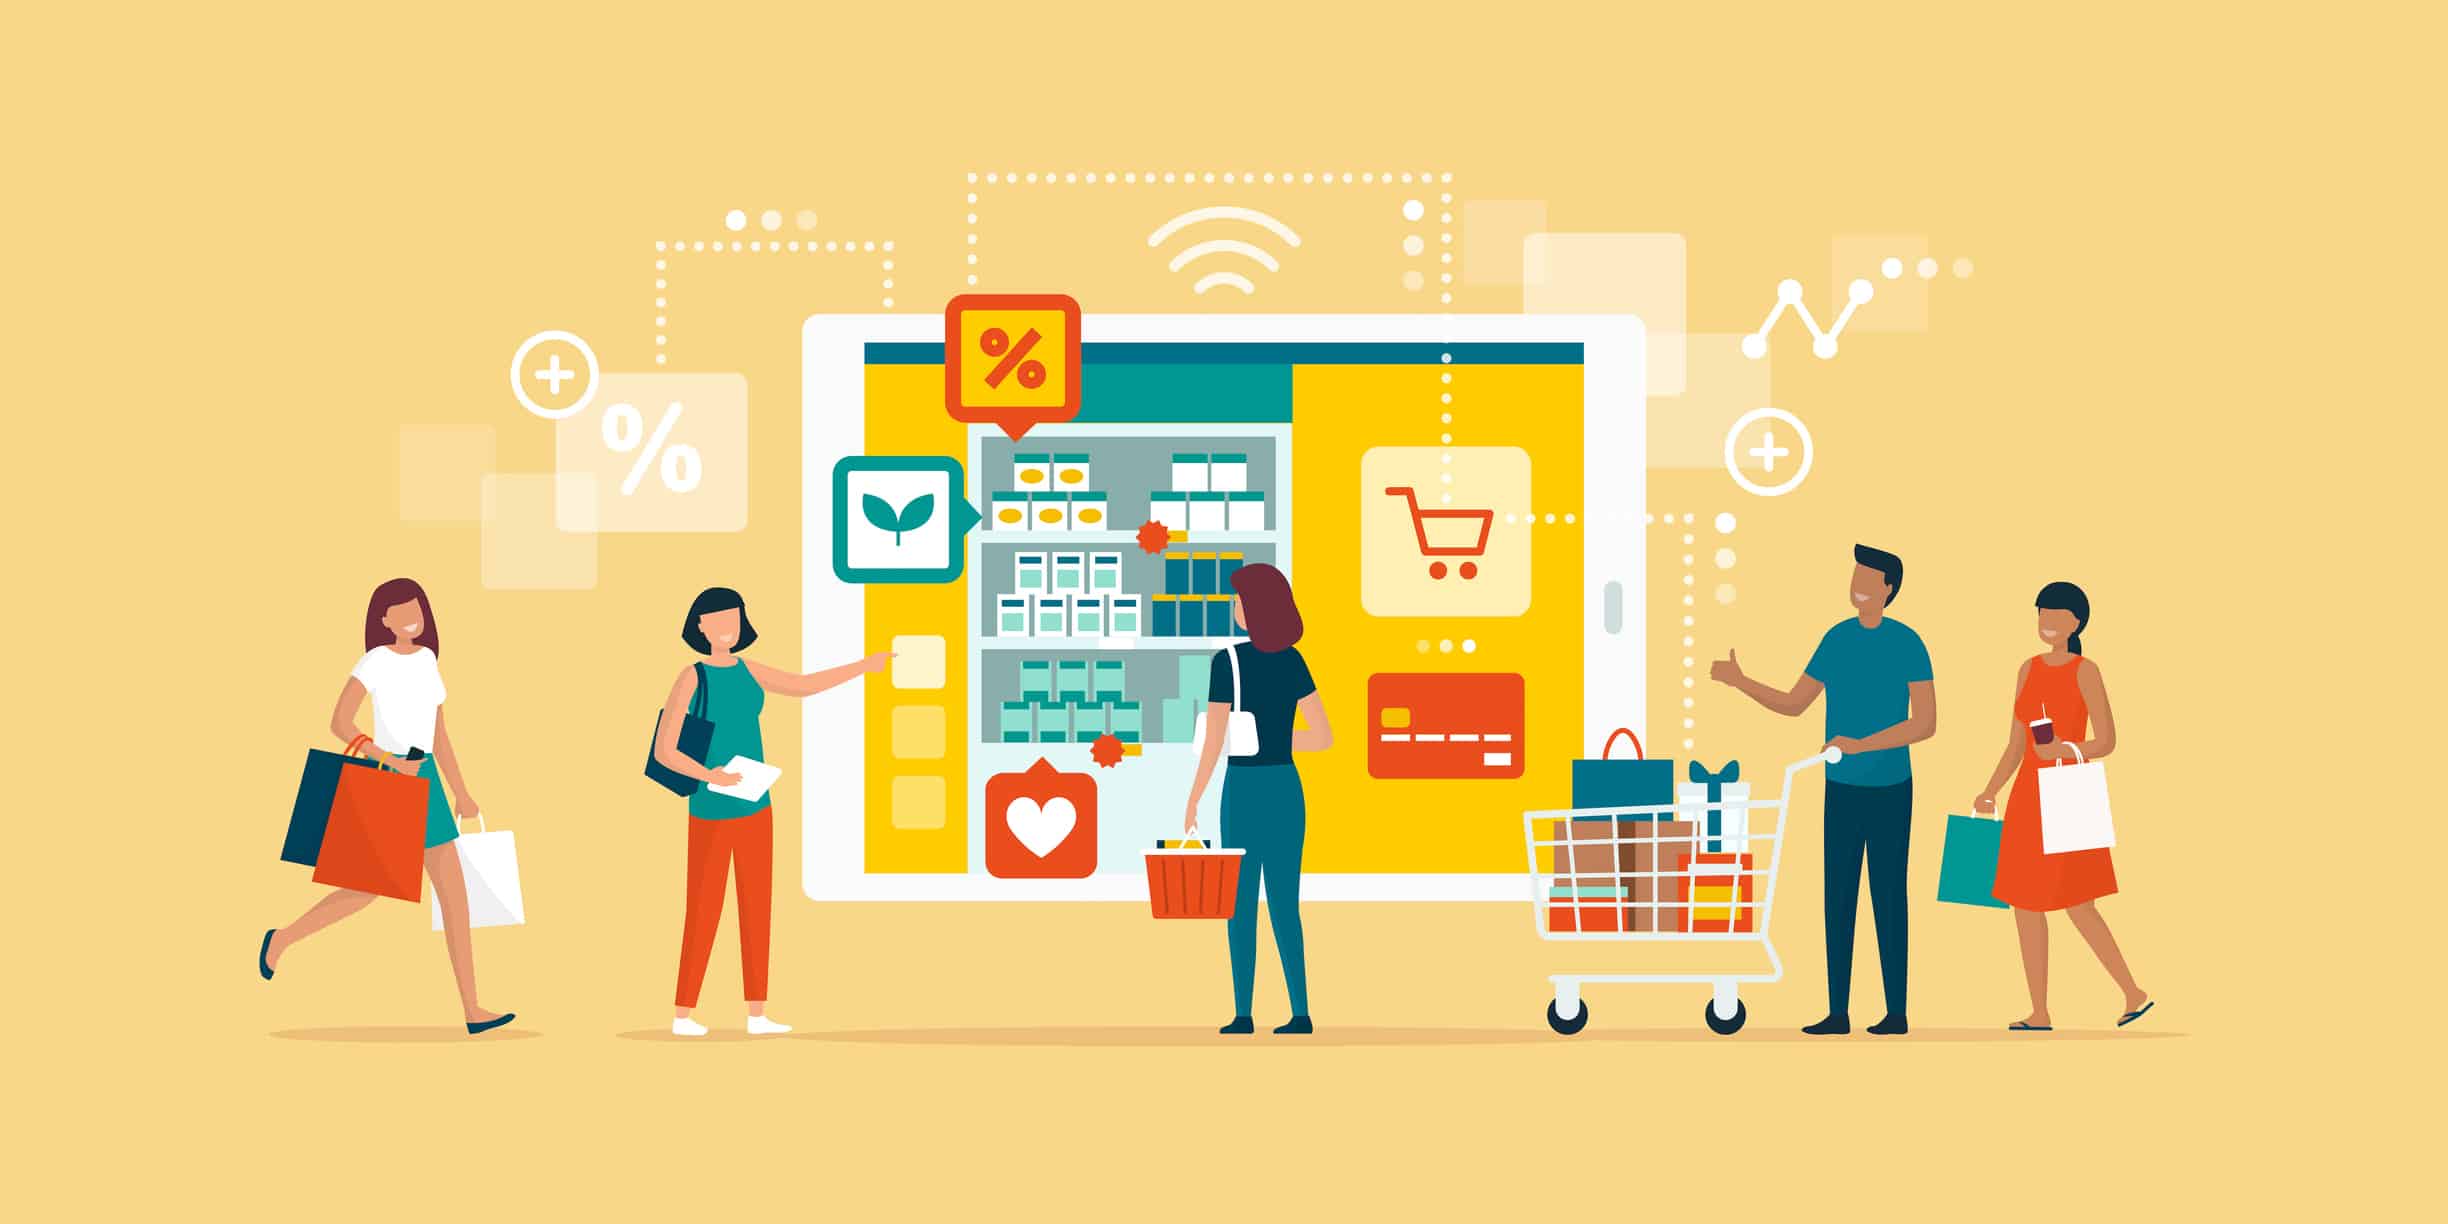 Customer experience on ecommerce sites